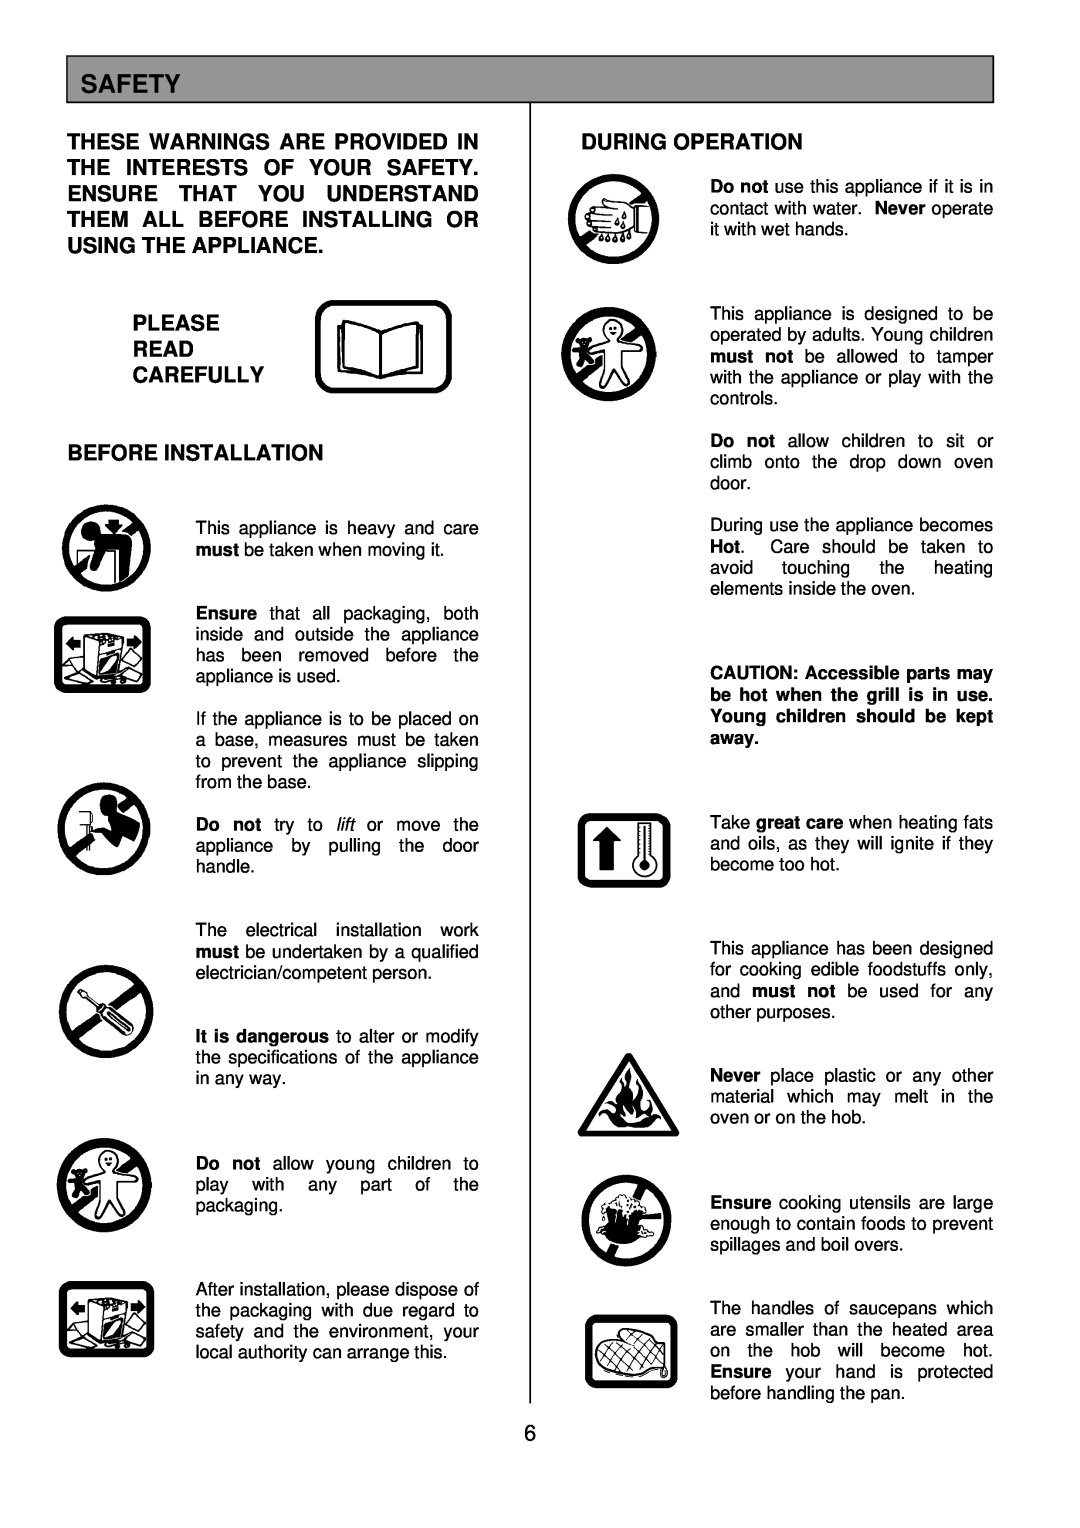 Tricity Bendix SIE 250 installation instructions Safety, Please Read Carefully Before Installation, During Operation 